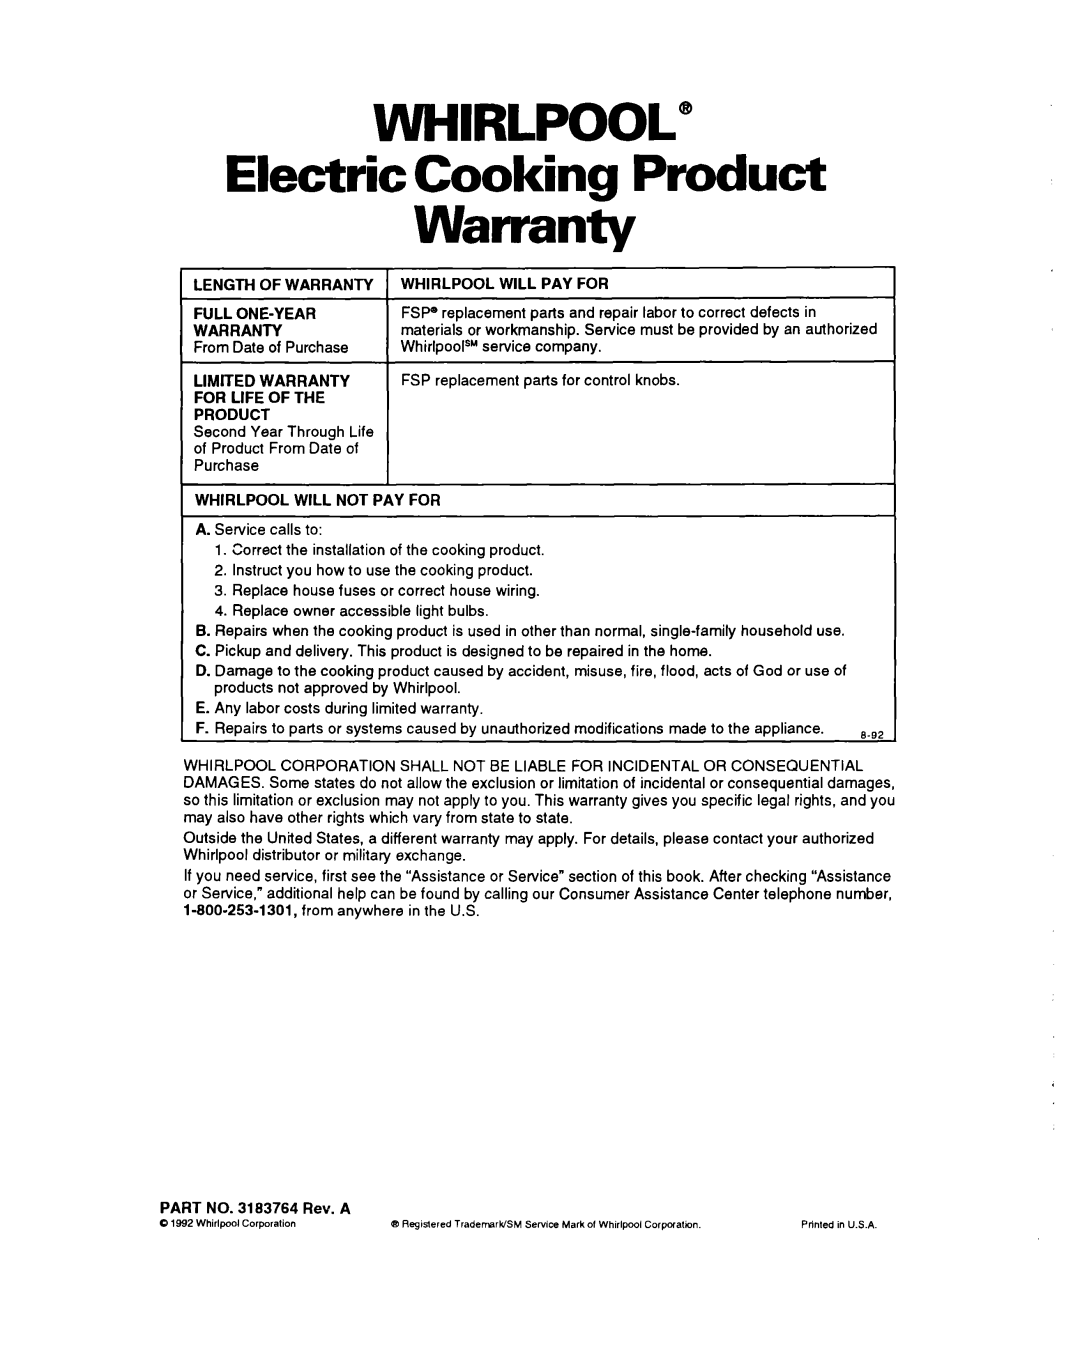 Whirlpool RS600BXY, Range, 336 important safety instructions WHIRLPOOL” Electric Cooking Product Warranty 